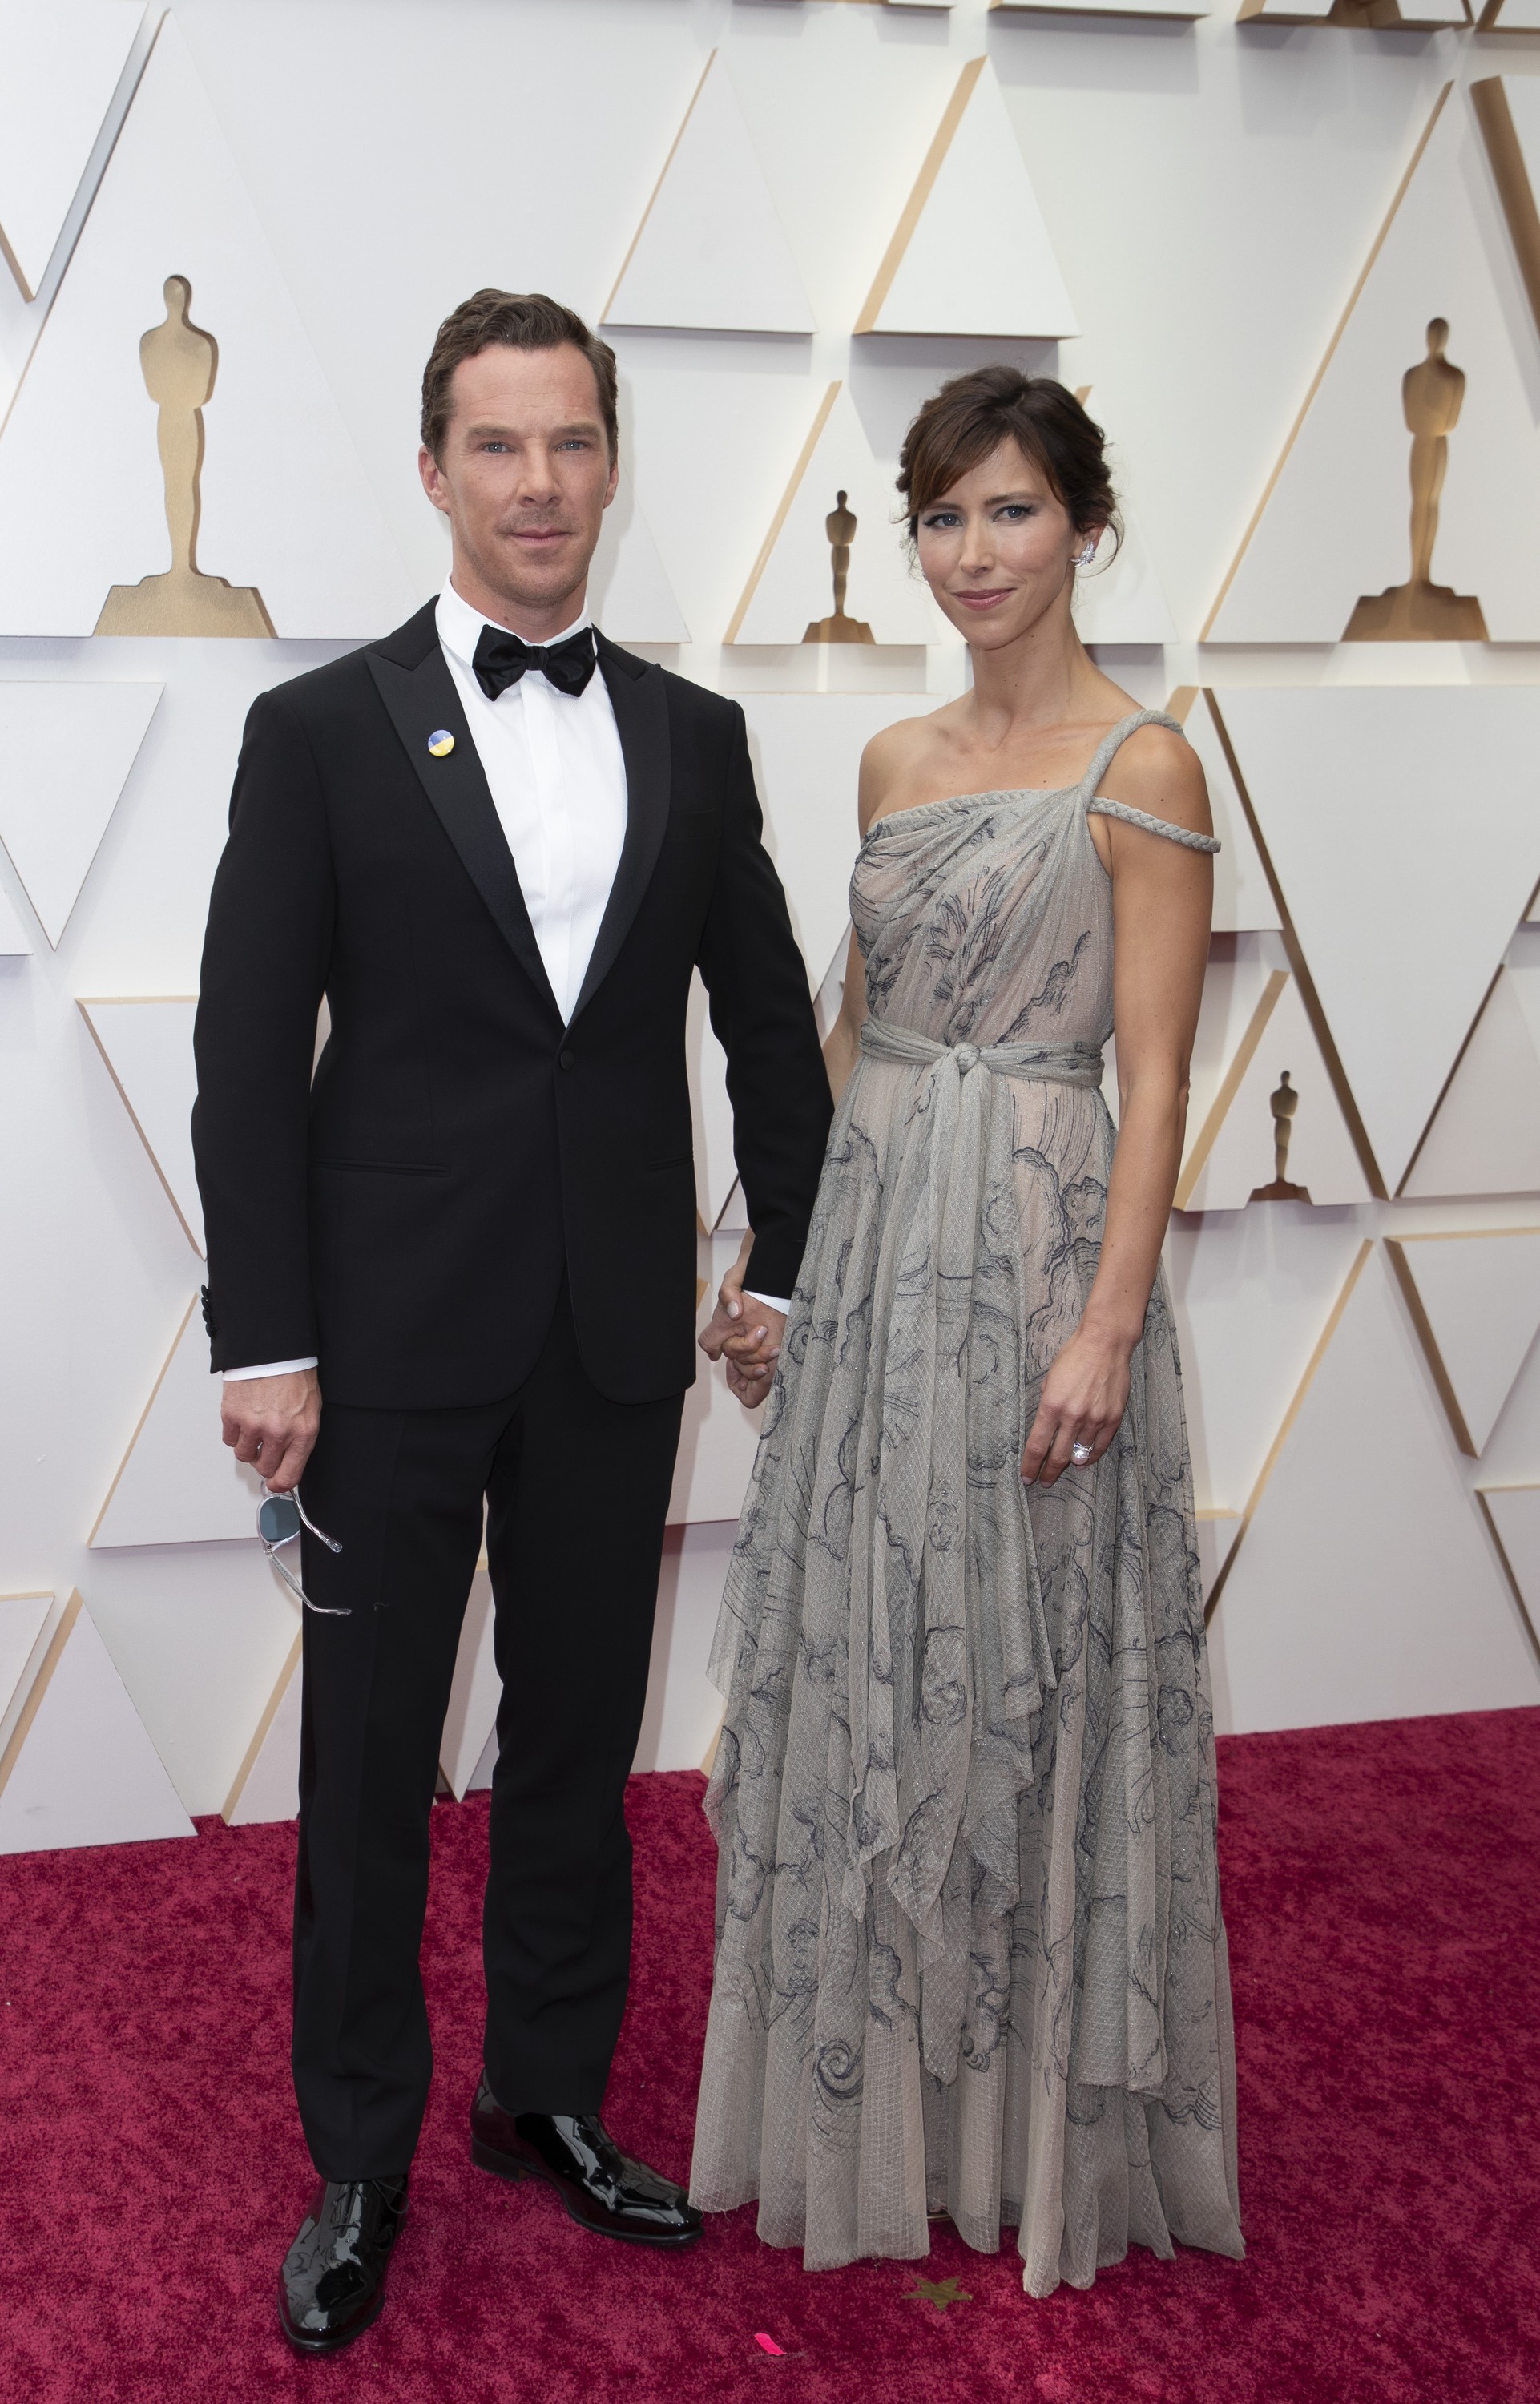 THE OSCARS®  The 94th Oscars® aired live Sunday March 27, from the Dolby® Theatre at Ovation Hollywood at 8 p.m. EDT/5 p.m. PDT on ABC in more than 200 territories worldwide. (ABC via Getty Images)BENEDICT CUMBERBATCH, SOPHIE HUNTER (Foto: ABC via Getty Images)